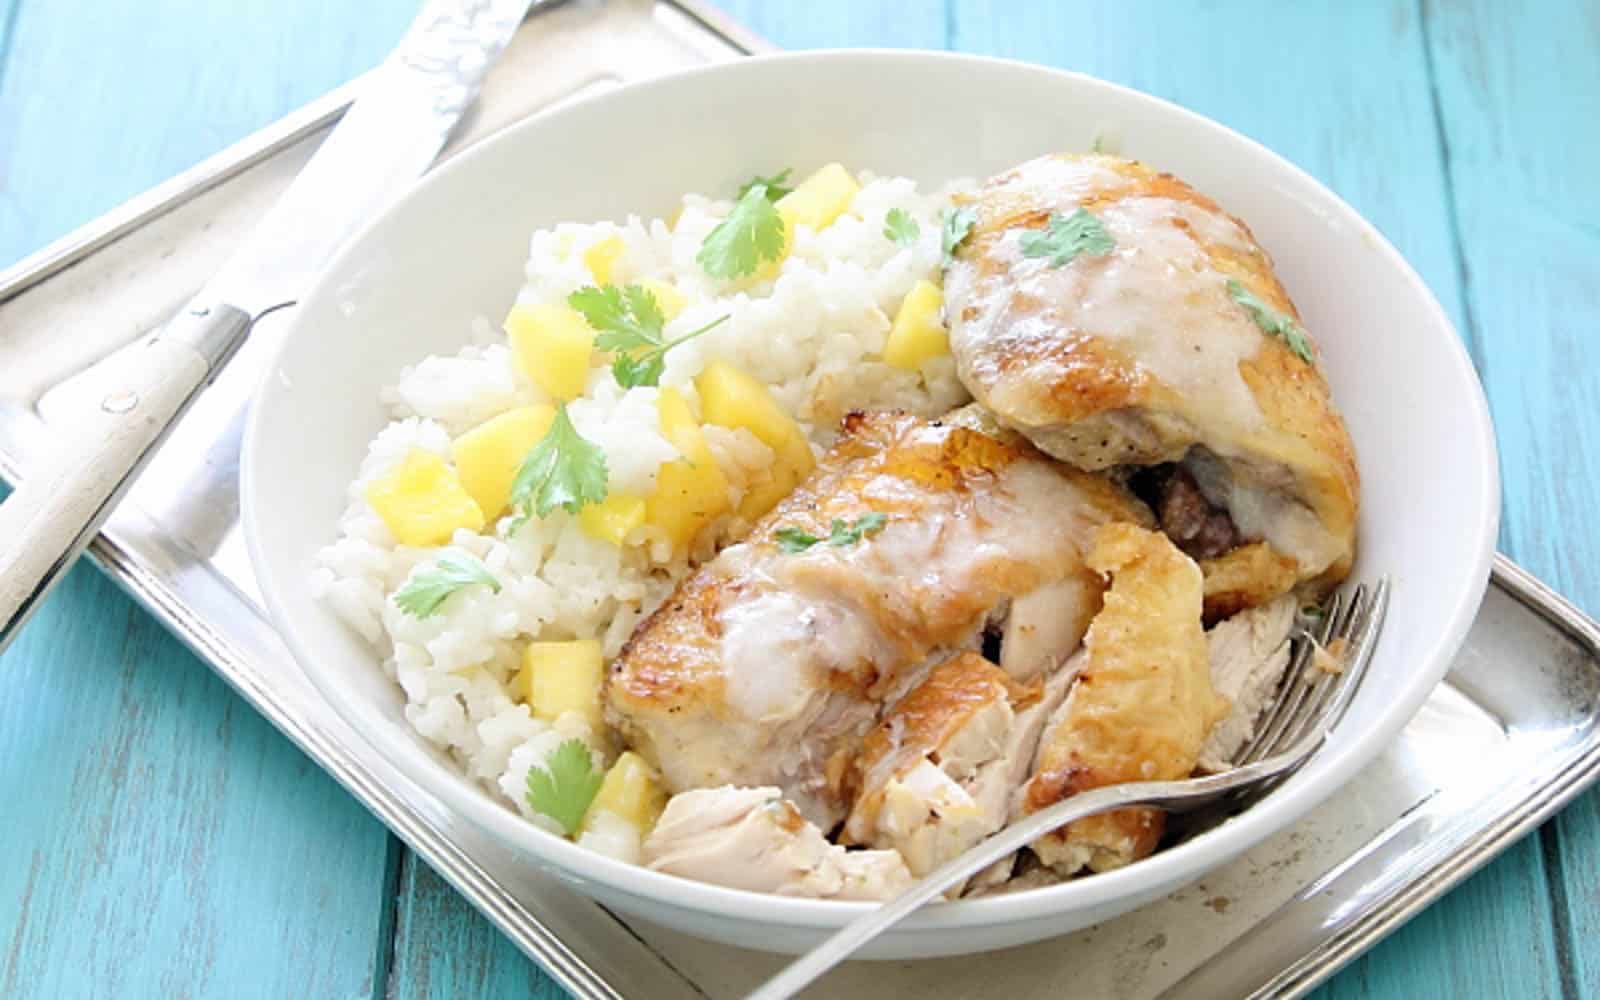 Baked chicken thighs with coconut lime sauce over white rice with mango.